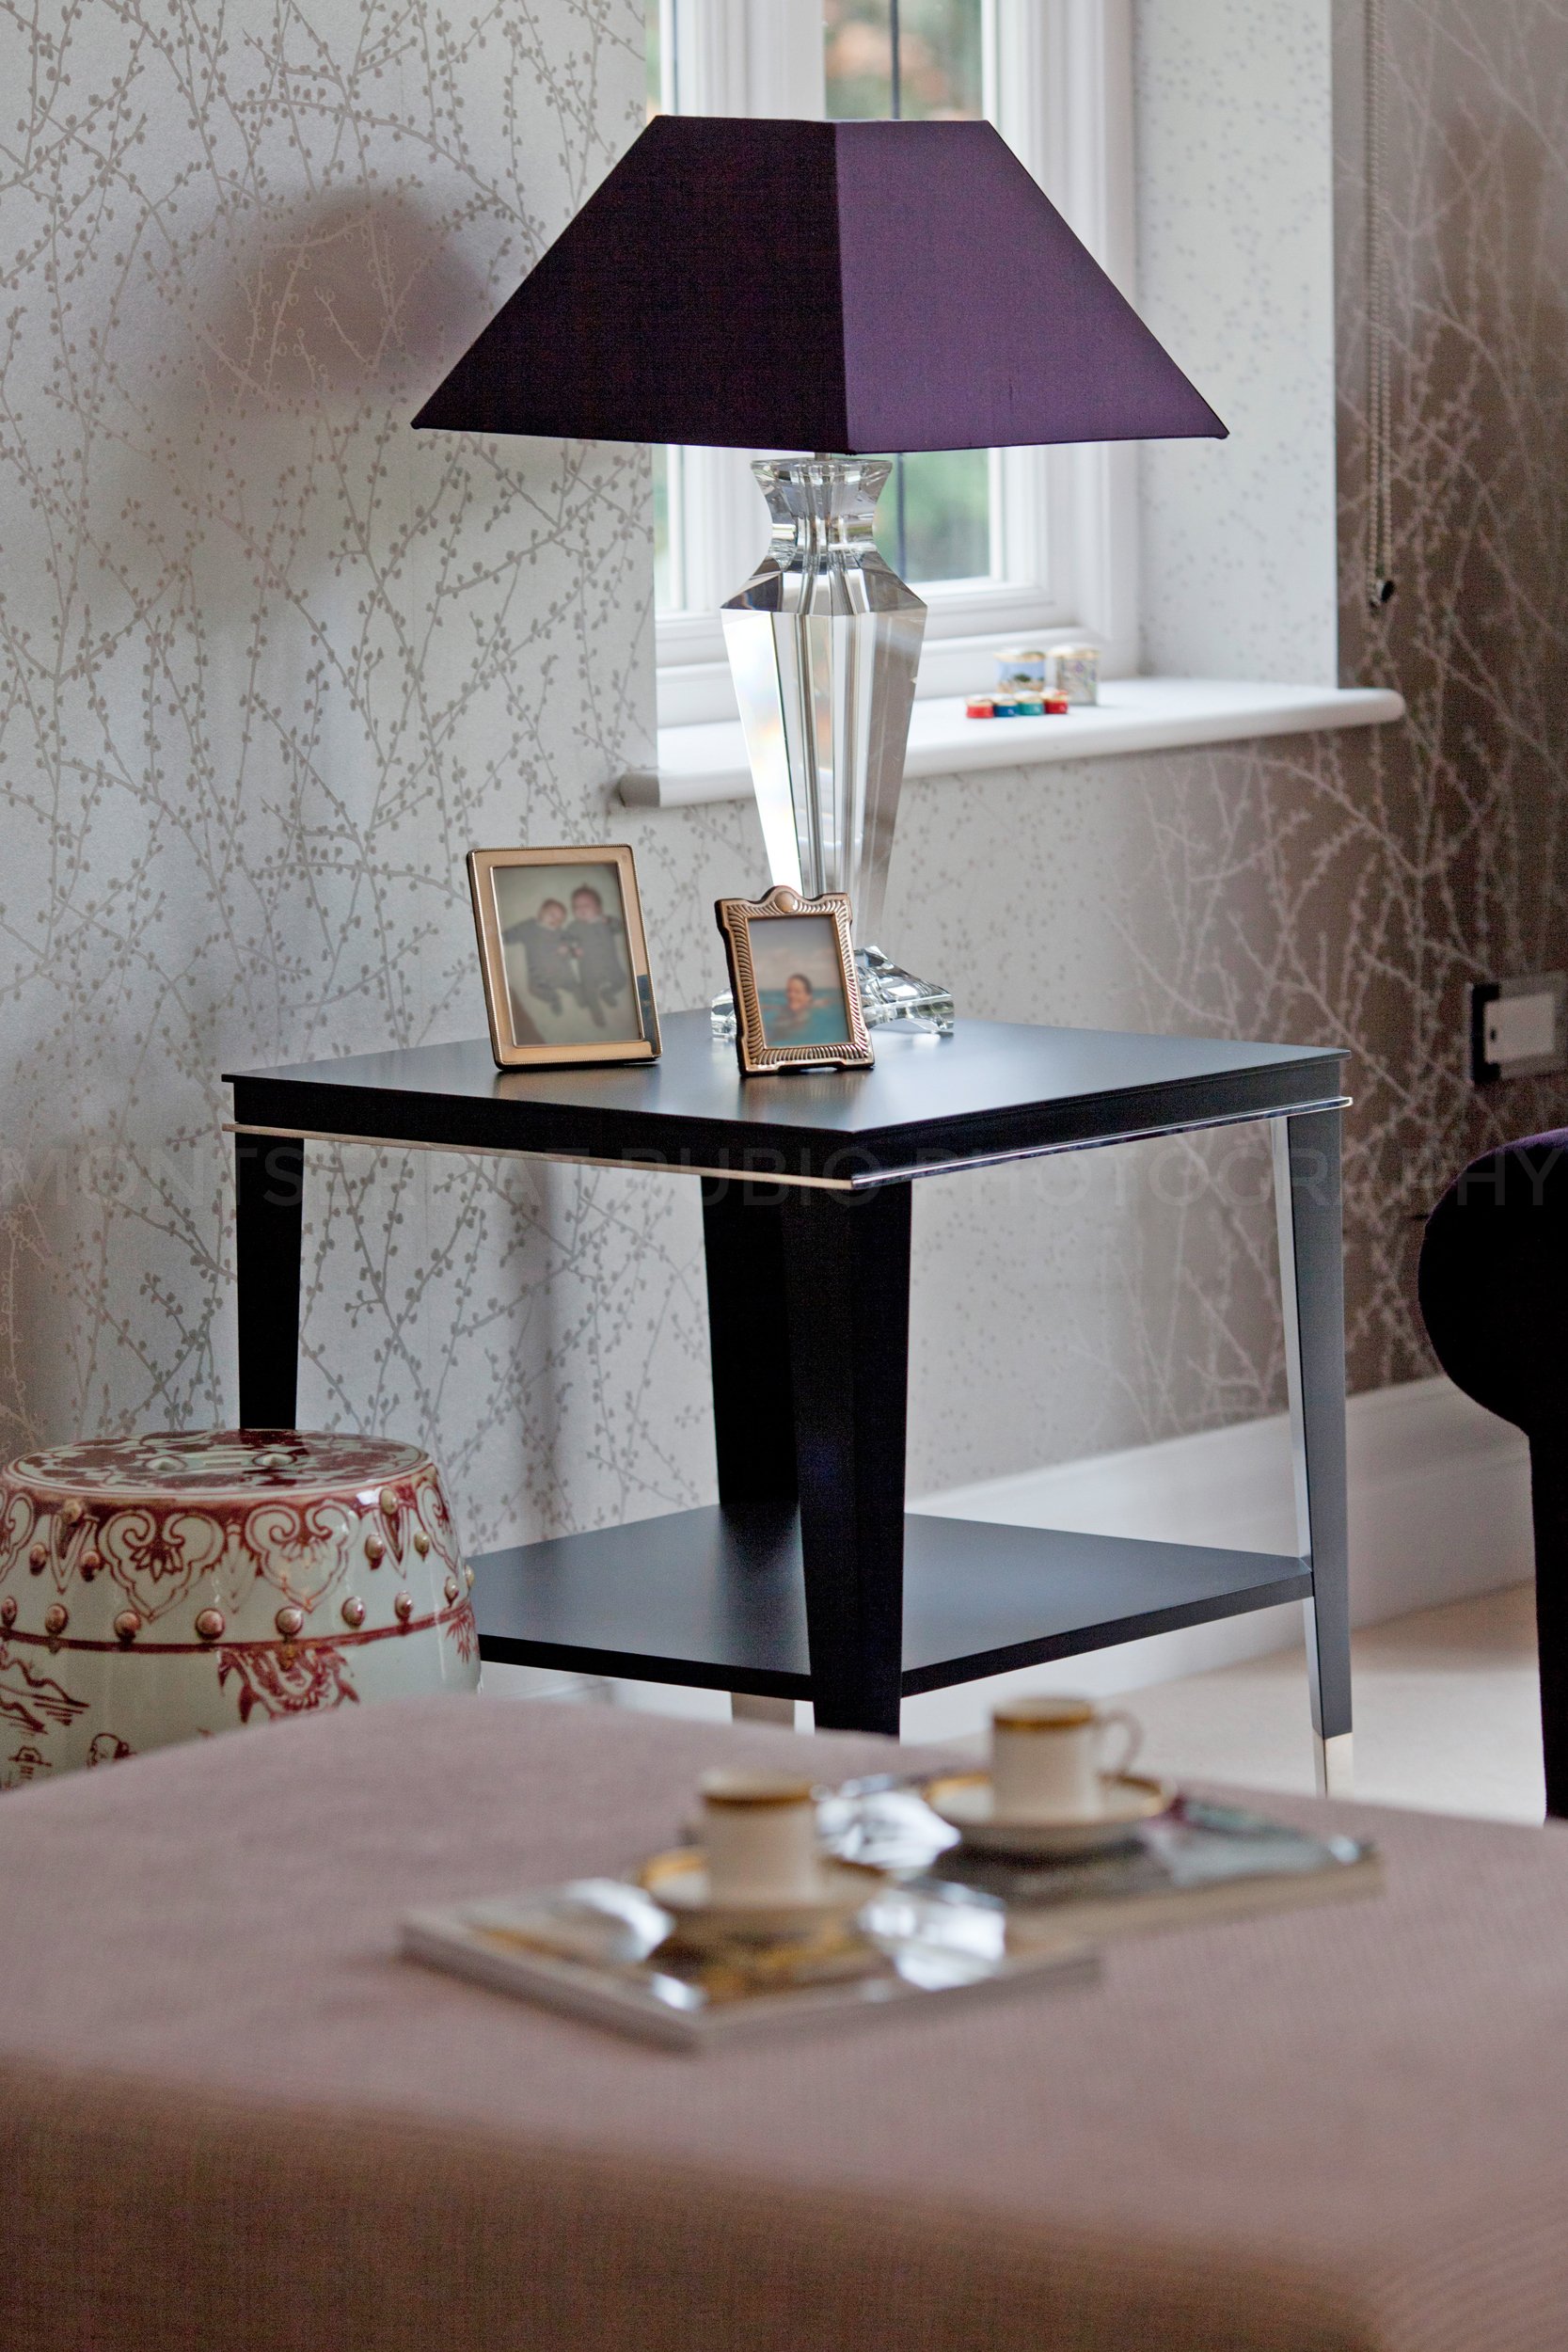 interior detail with lamp table in living room